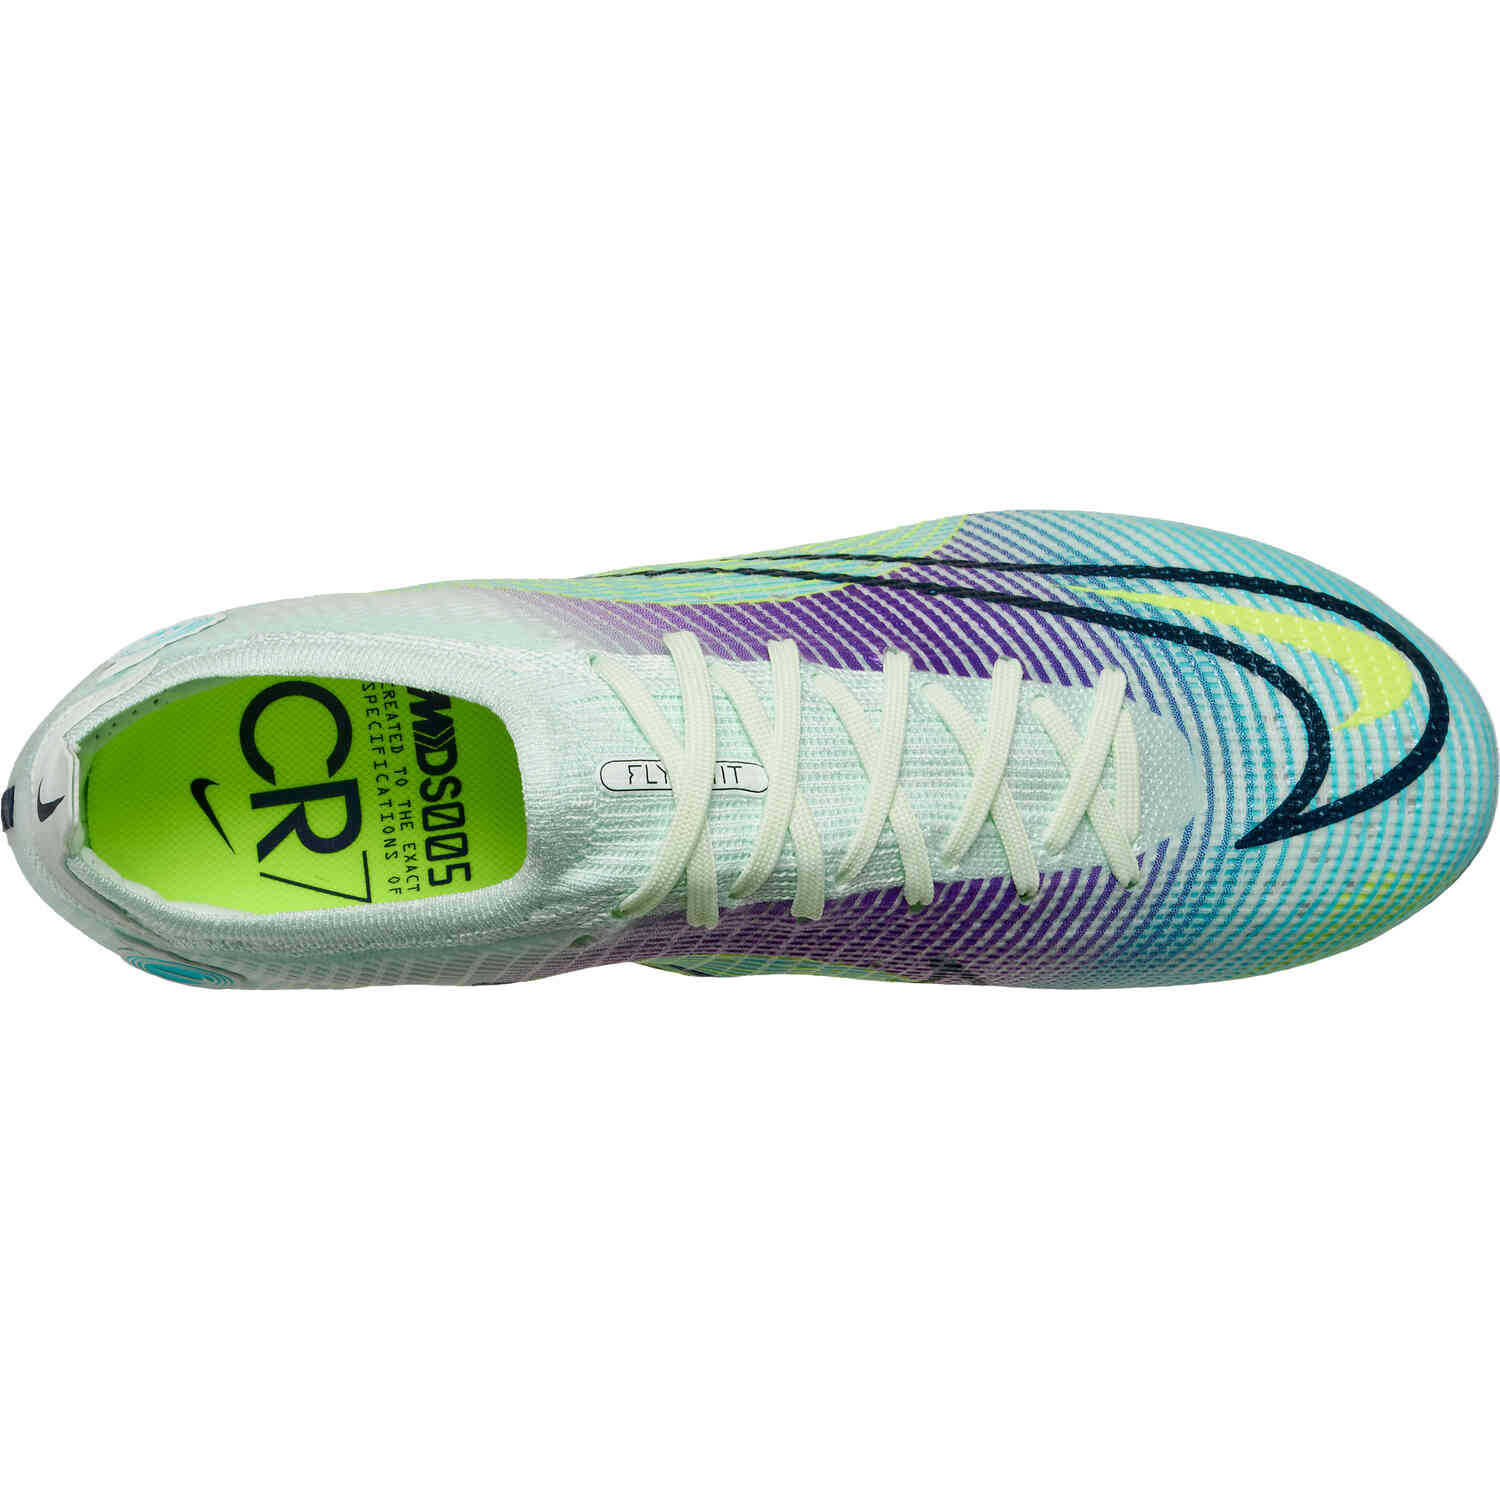 Nike Dream Speed Mercurial Elite FG Firm Ground Soccer Cleats – - Master